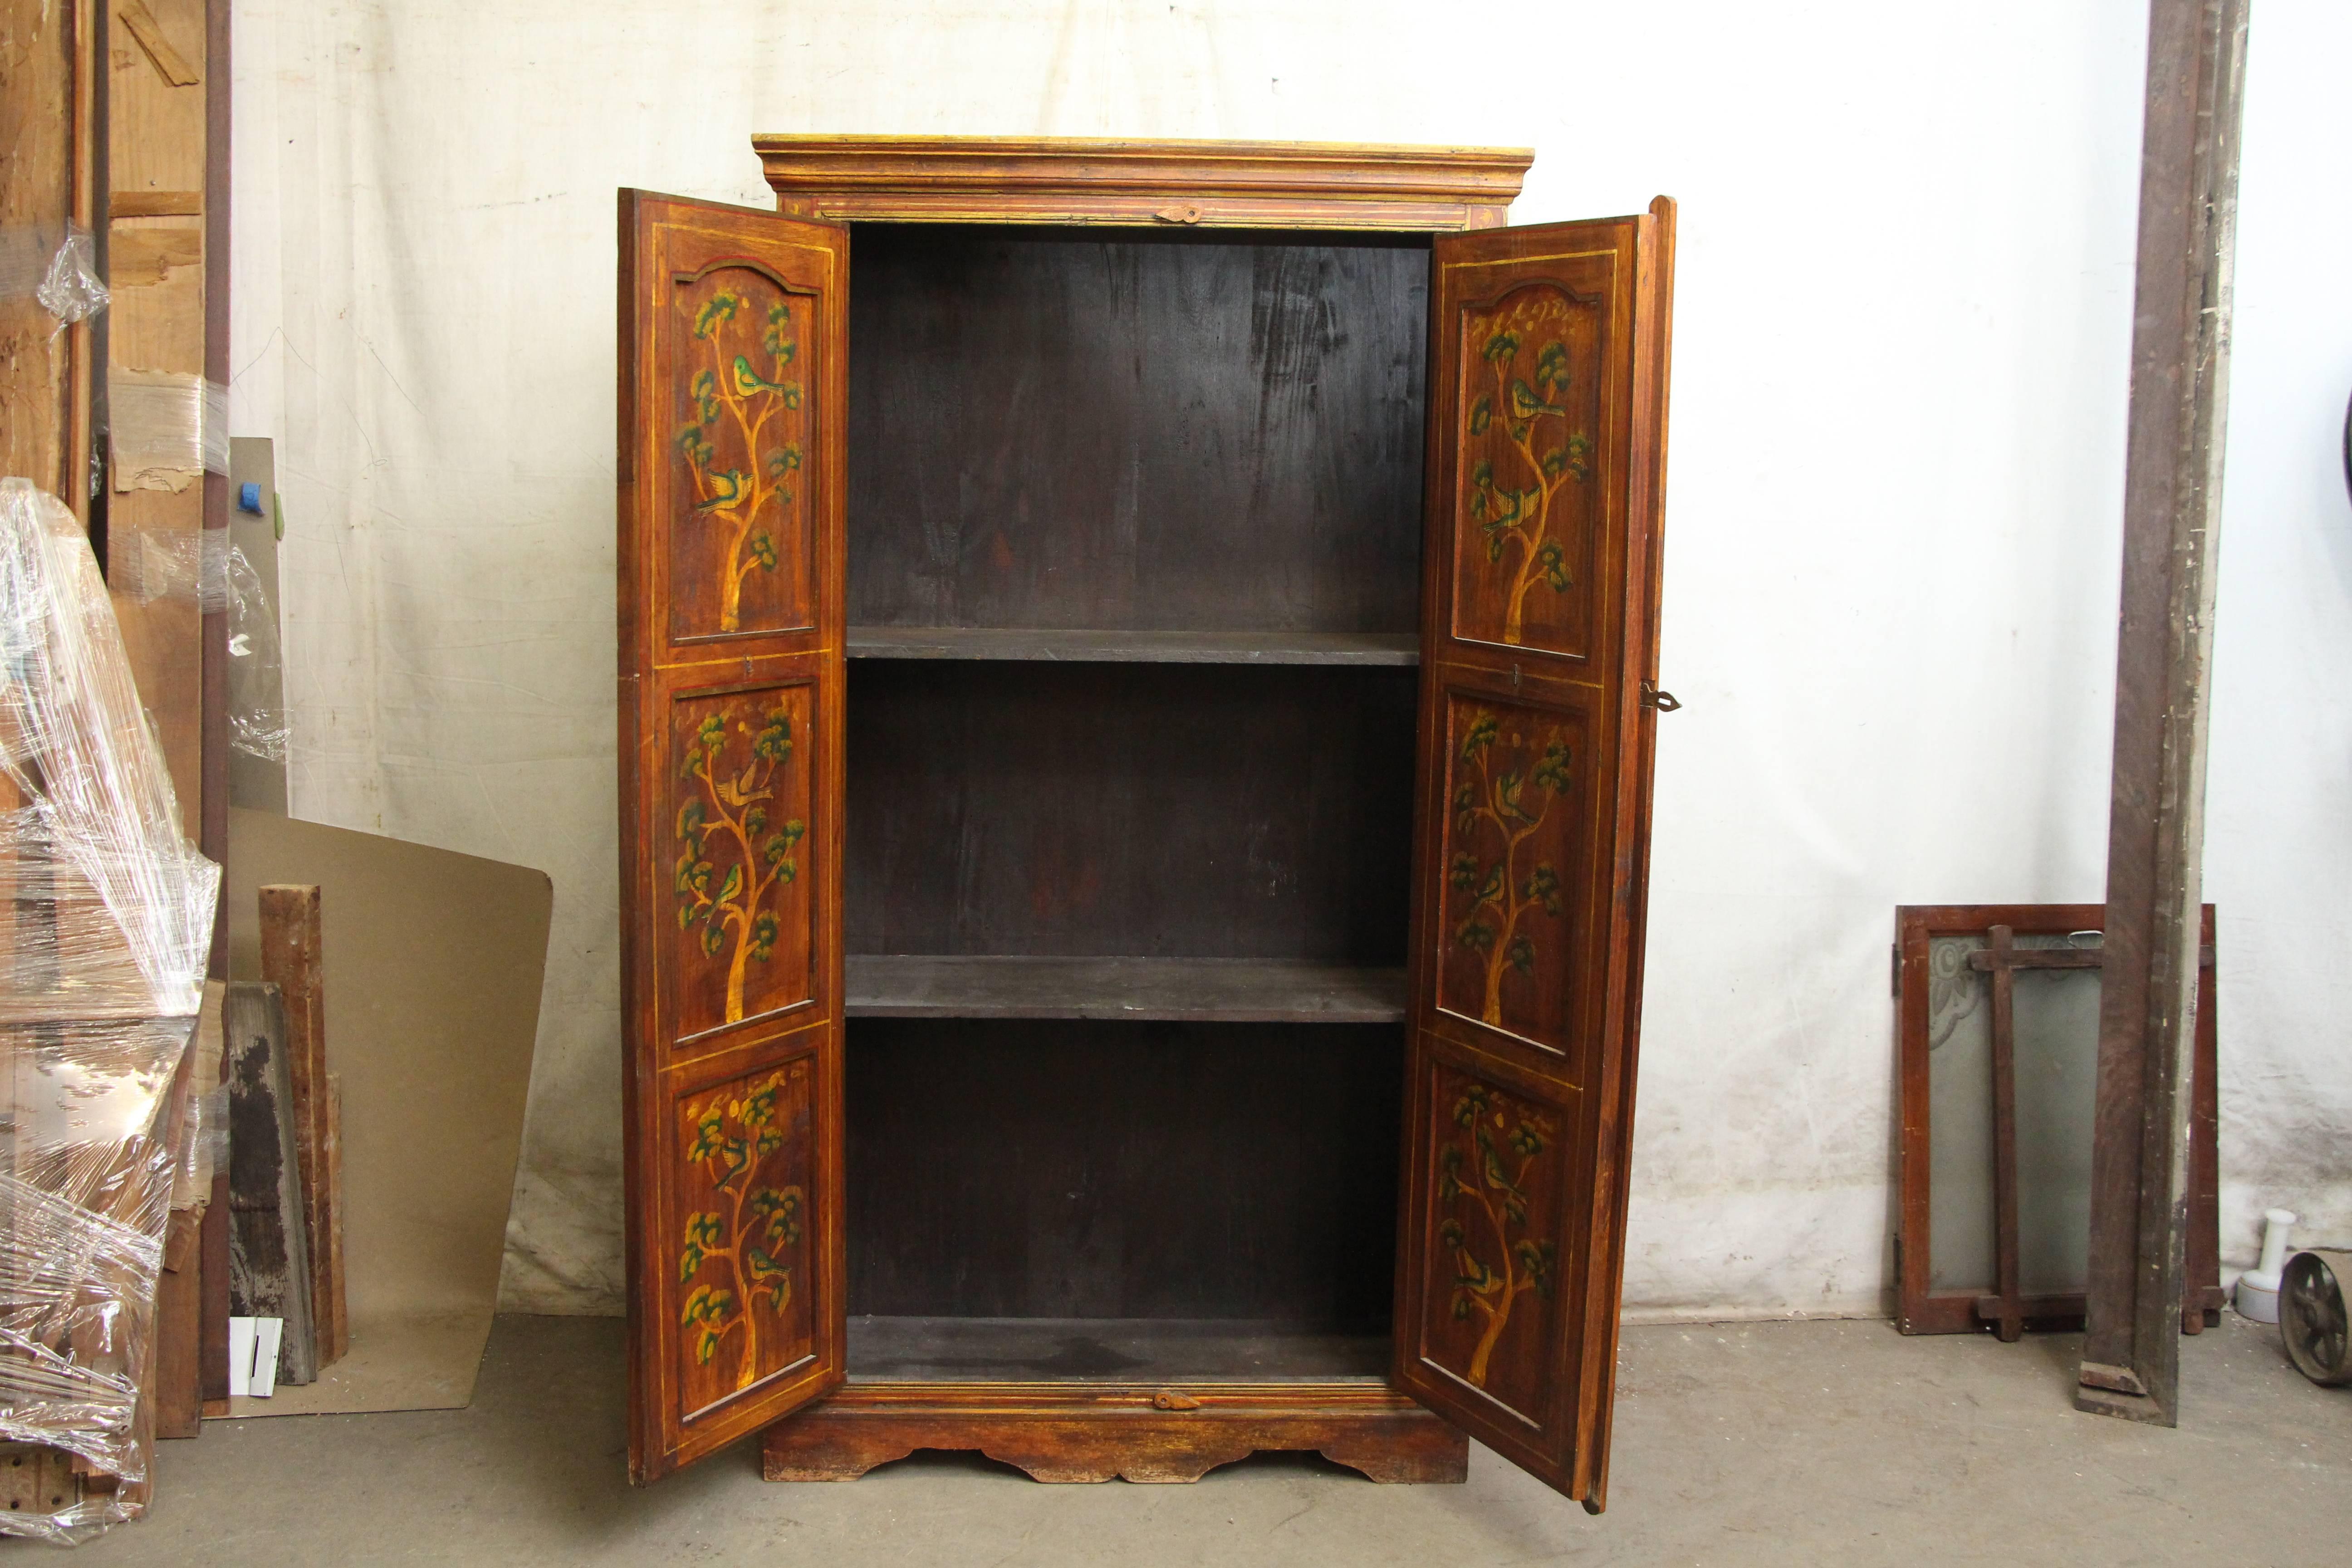 Unknown 1990s Hand-Painted Floral Wood Cabinet with Three Shelves